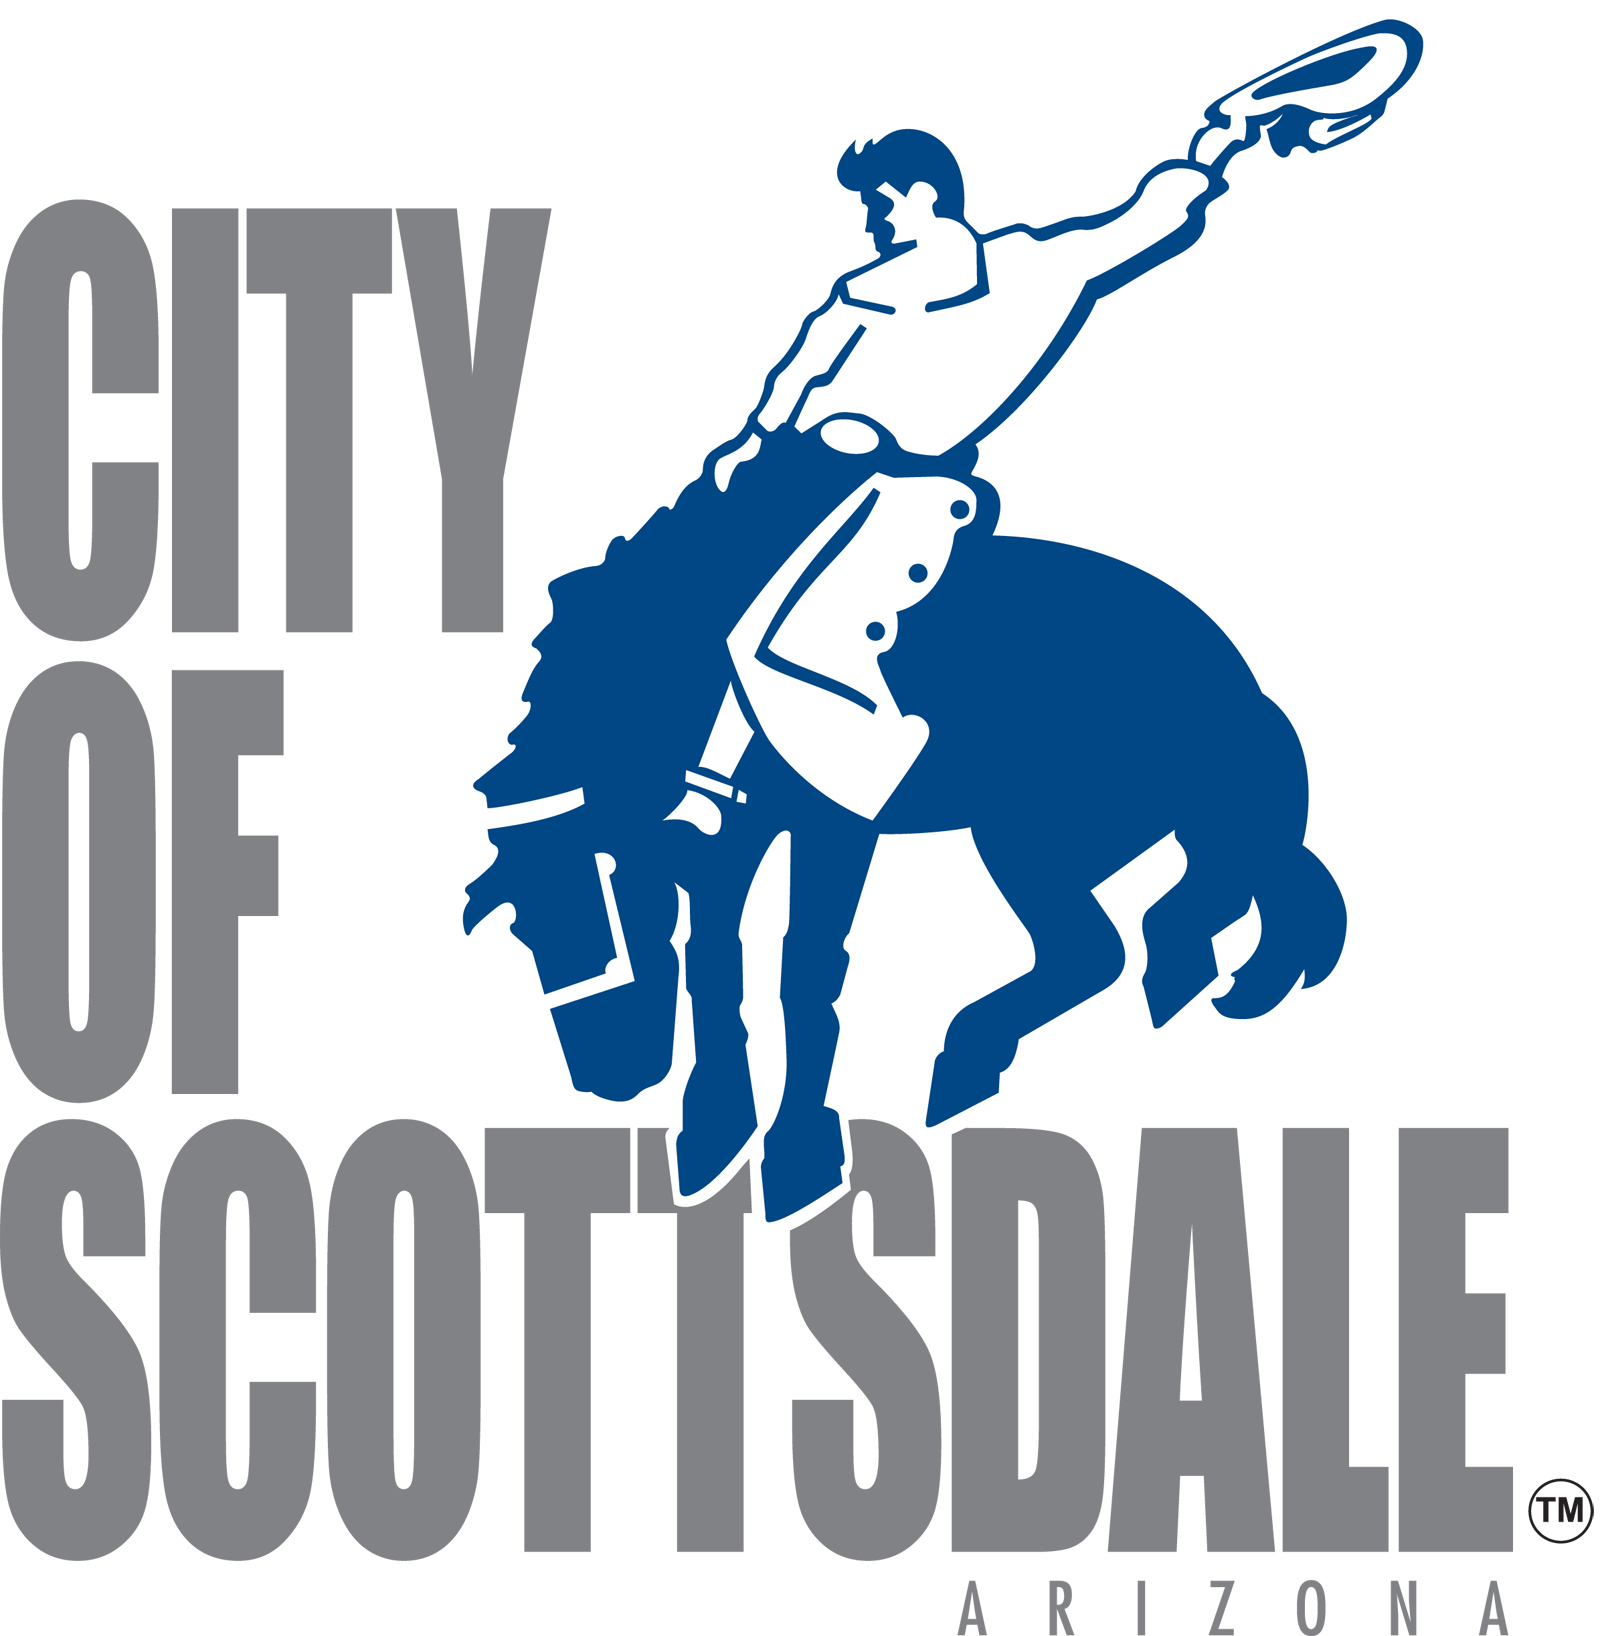 City of Scottsdale Logo with Horse and Rider